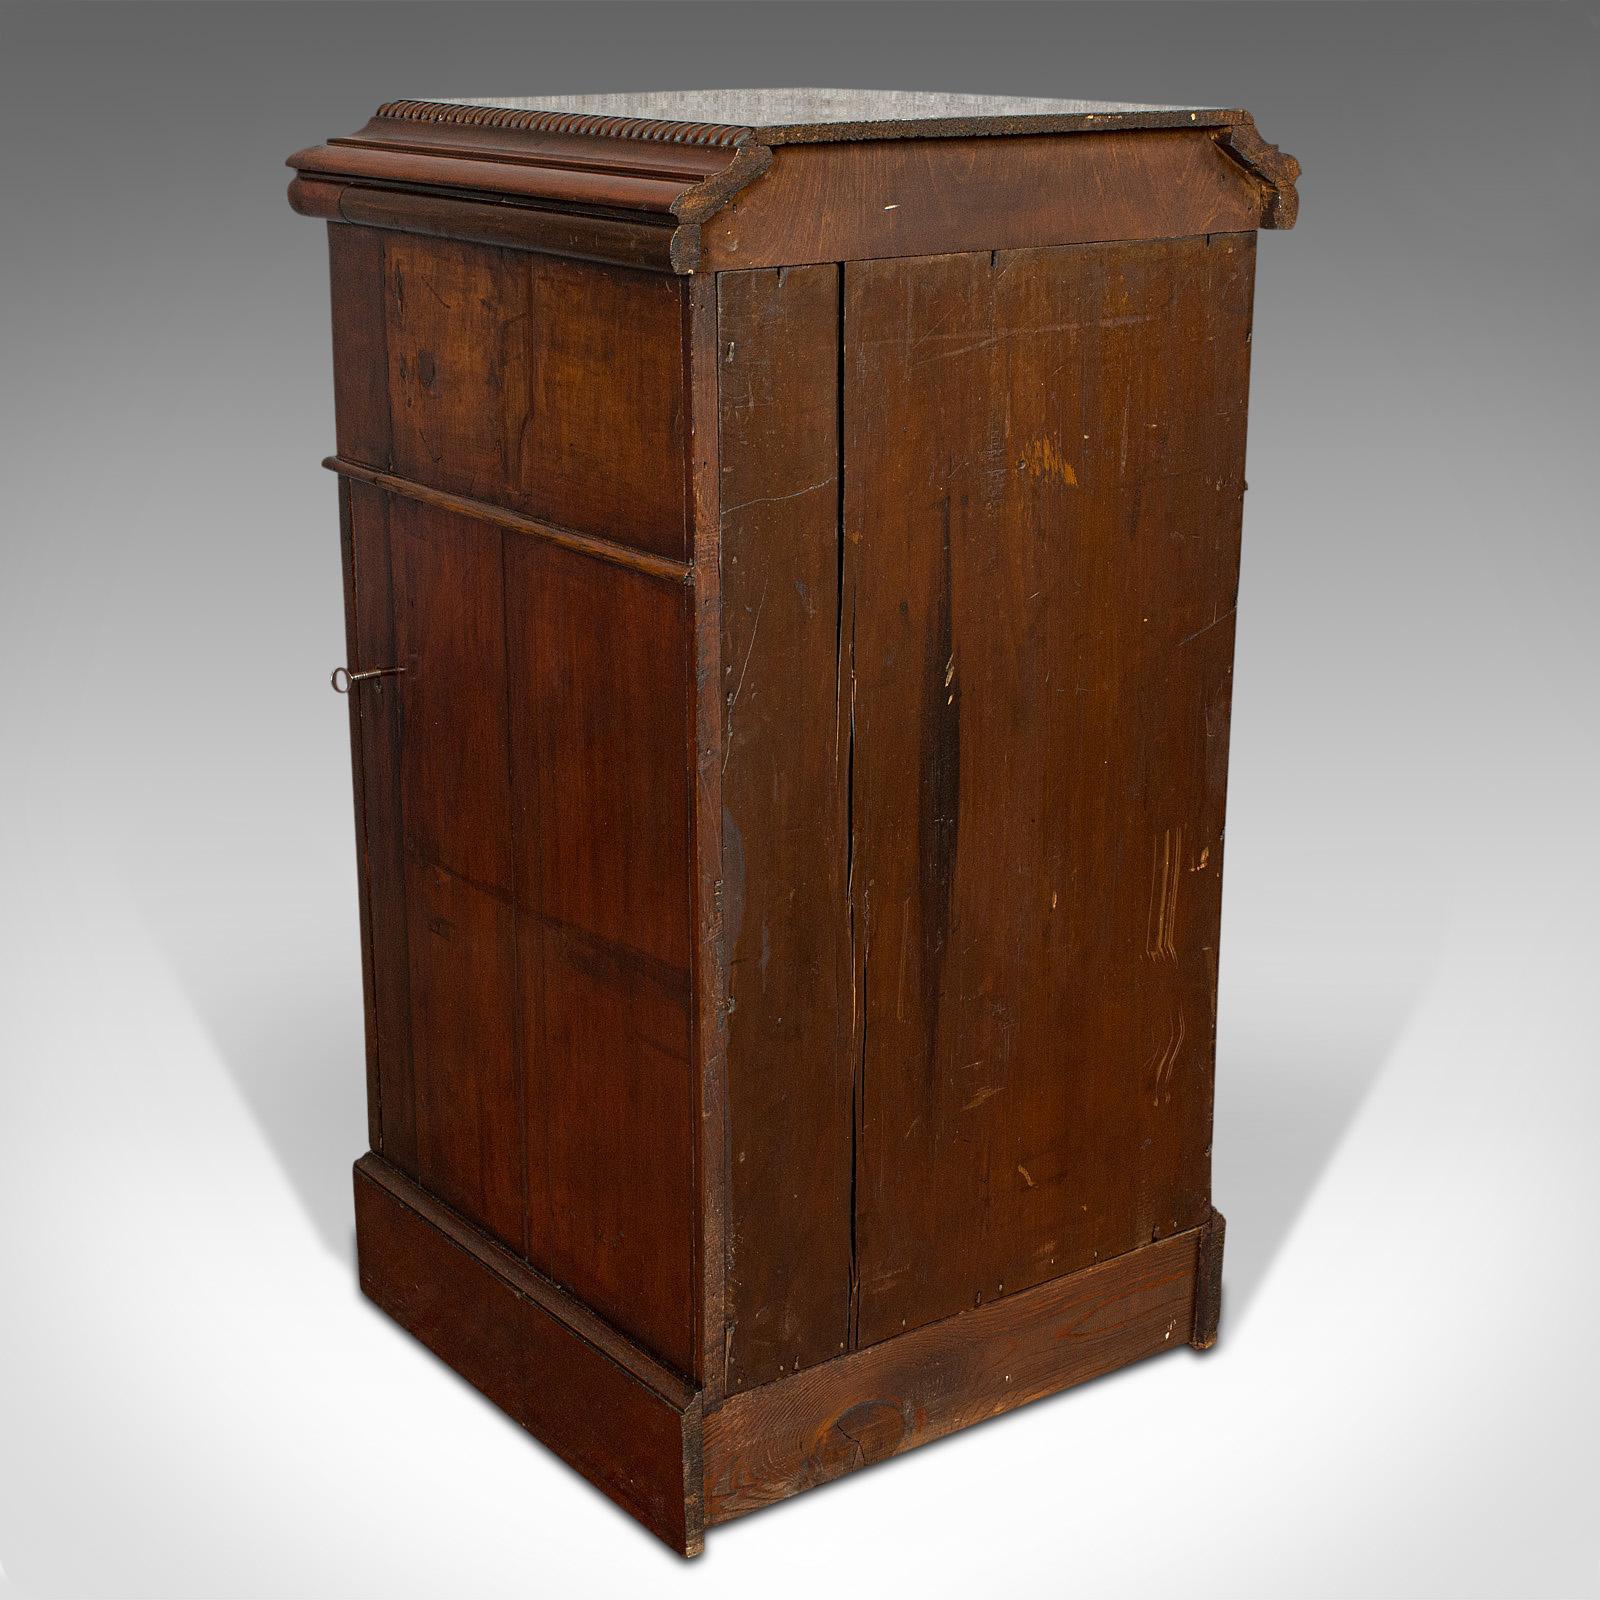 Tall Antique Side Cabinet, English, Mahogany, Bedside, Nightstand, Regency, 1820 1